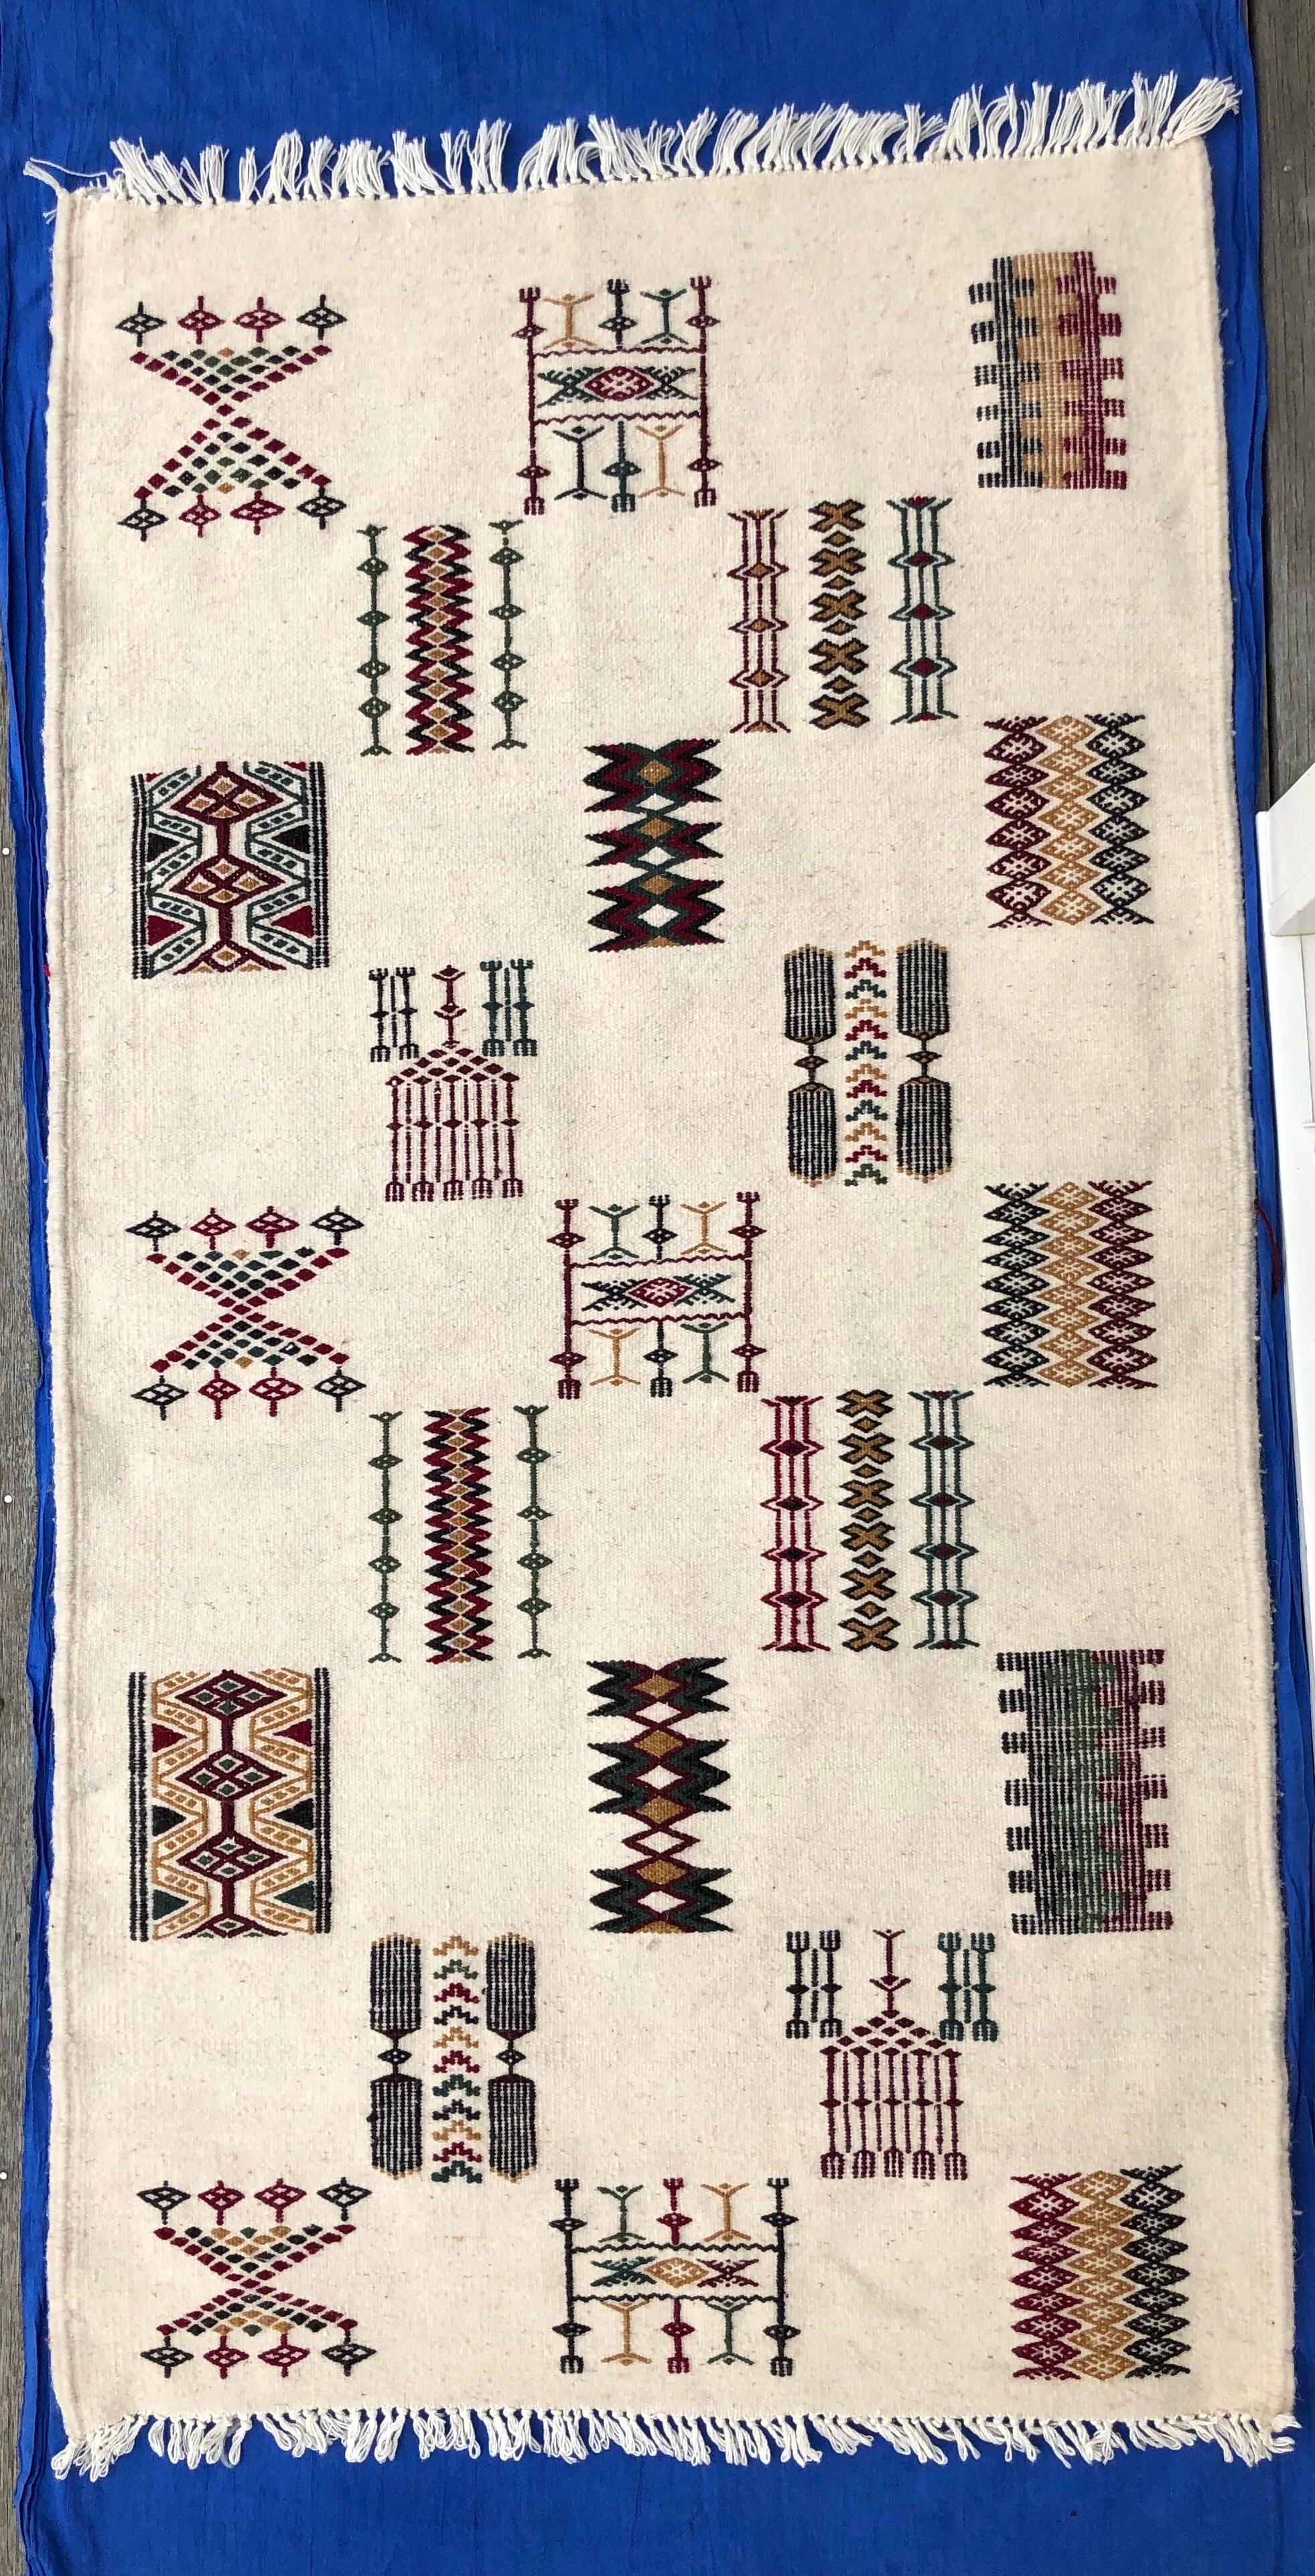 This gorgeous rug is hand-loomed from 100% sheep's wool and pearl cotton fibers. Berber use them in multi purposes on floor, hang them on wall as art or put on sofa. The symbols on this rug represent the combs used to clean the wool, 
as well as